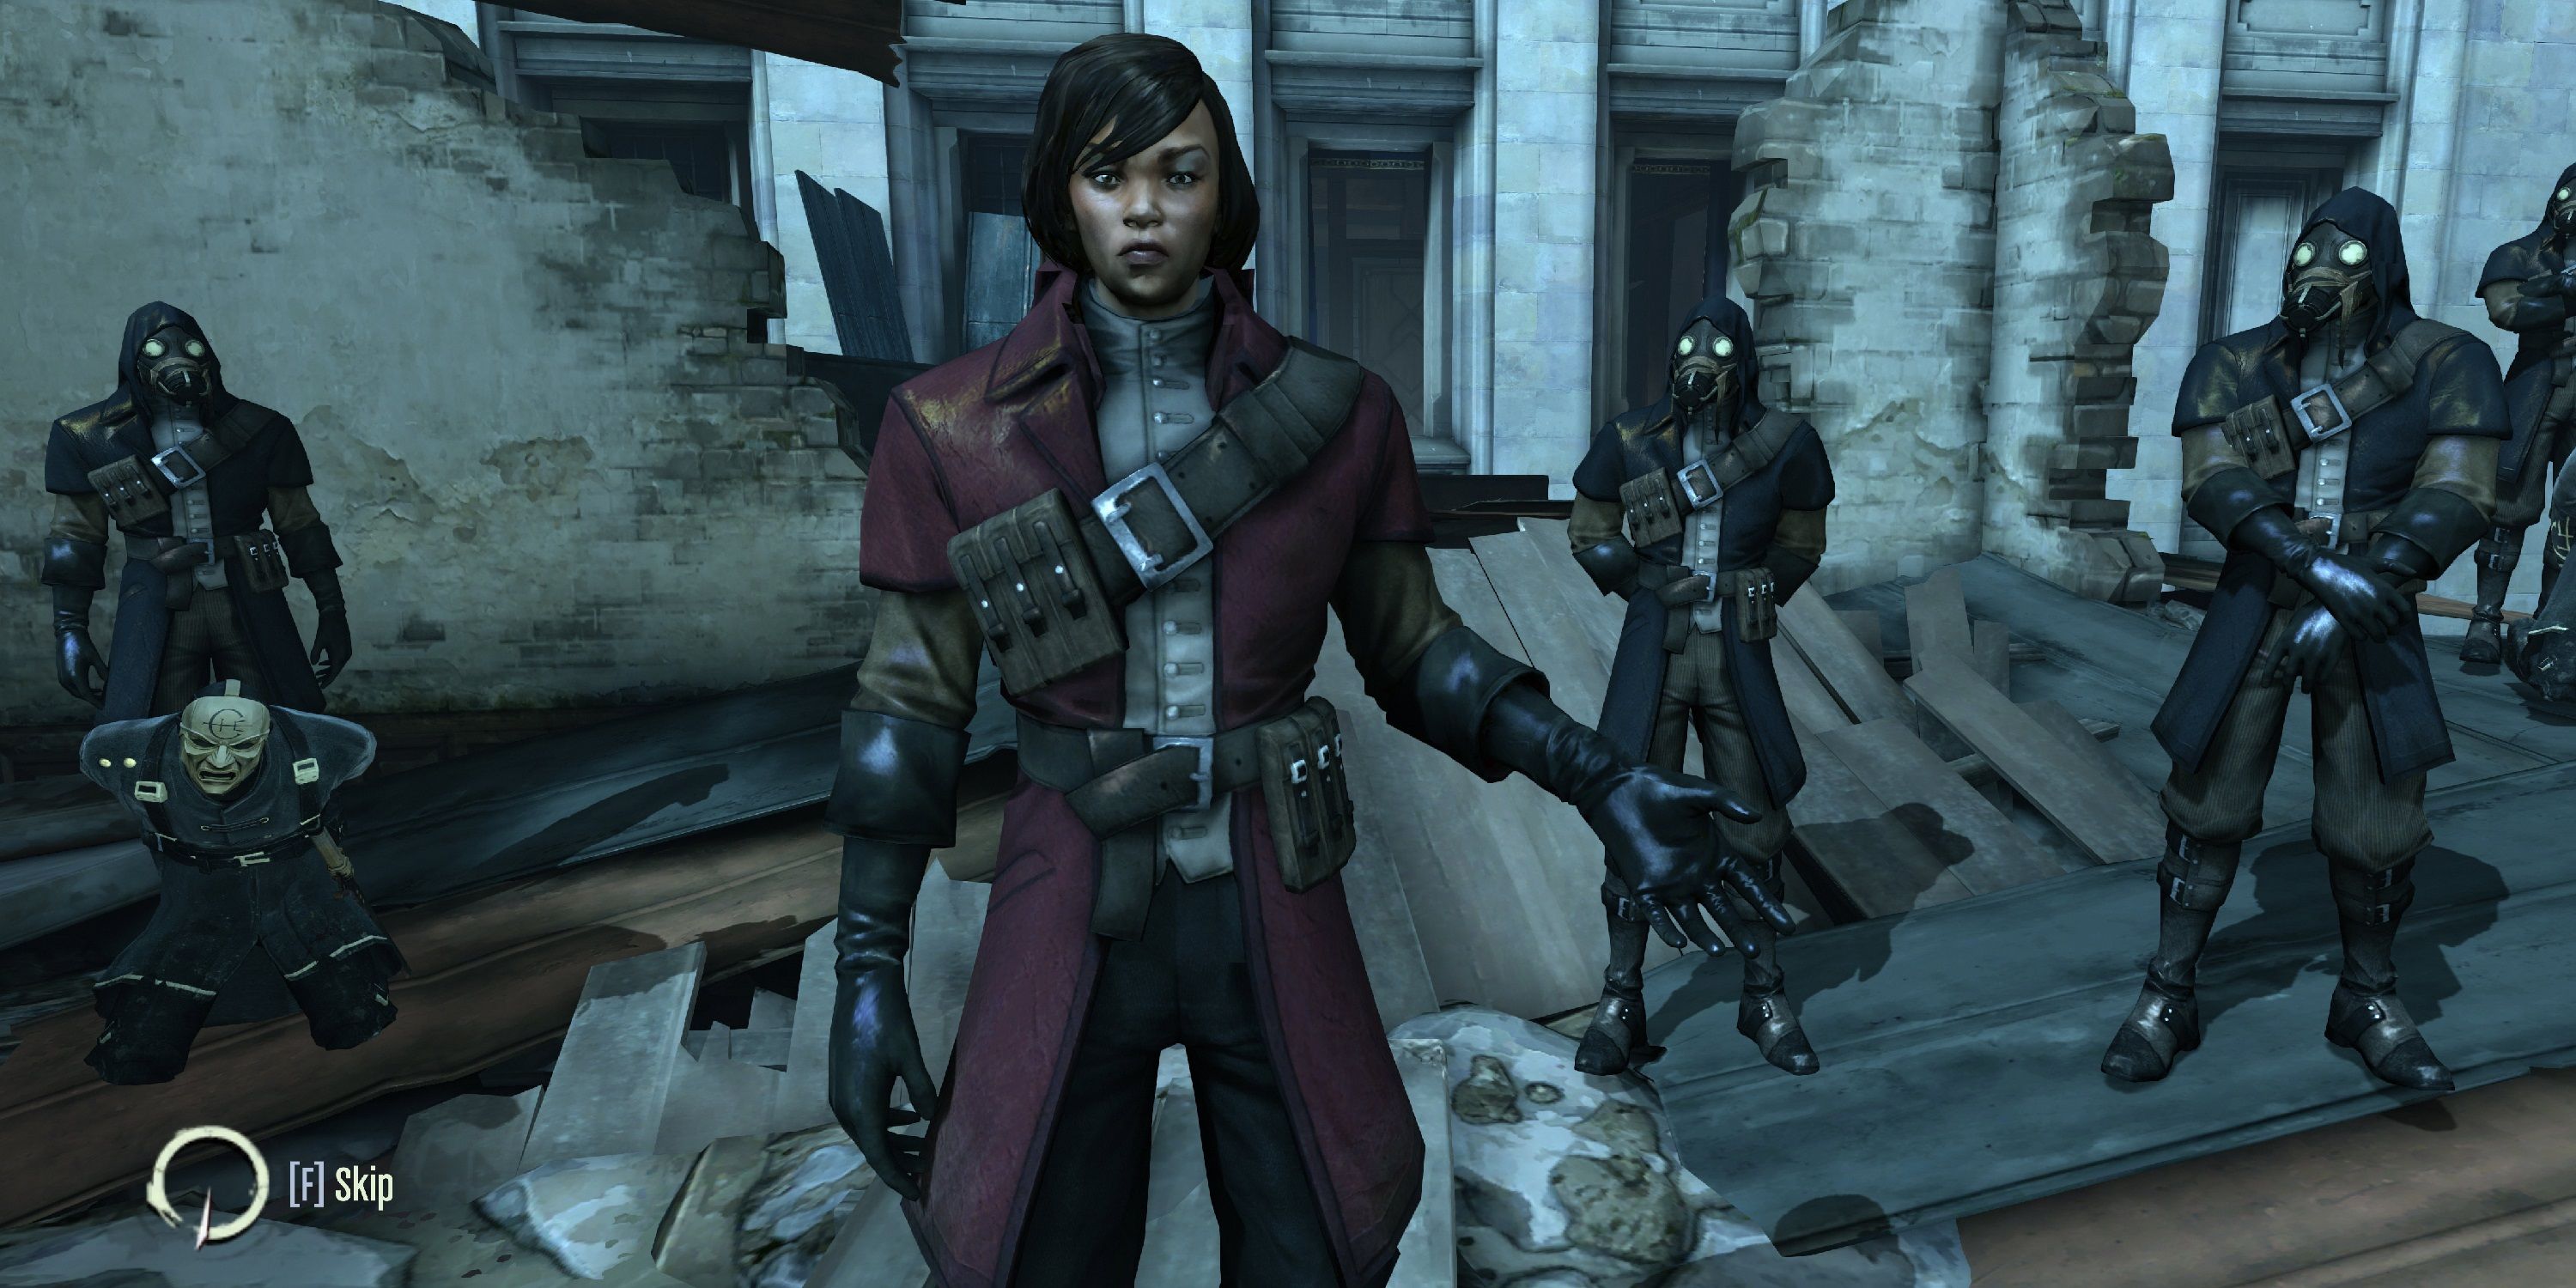 Dishonored DLC, Daud decides whether or not to spare Billie Lurk